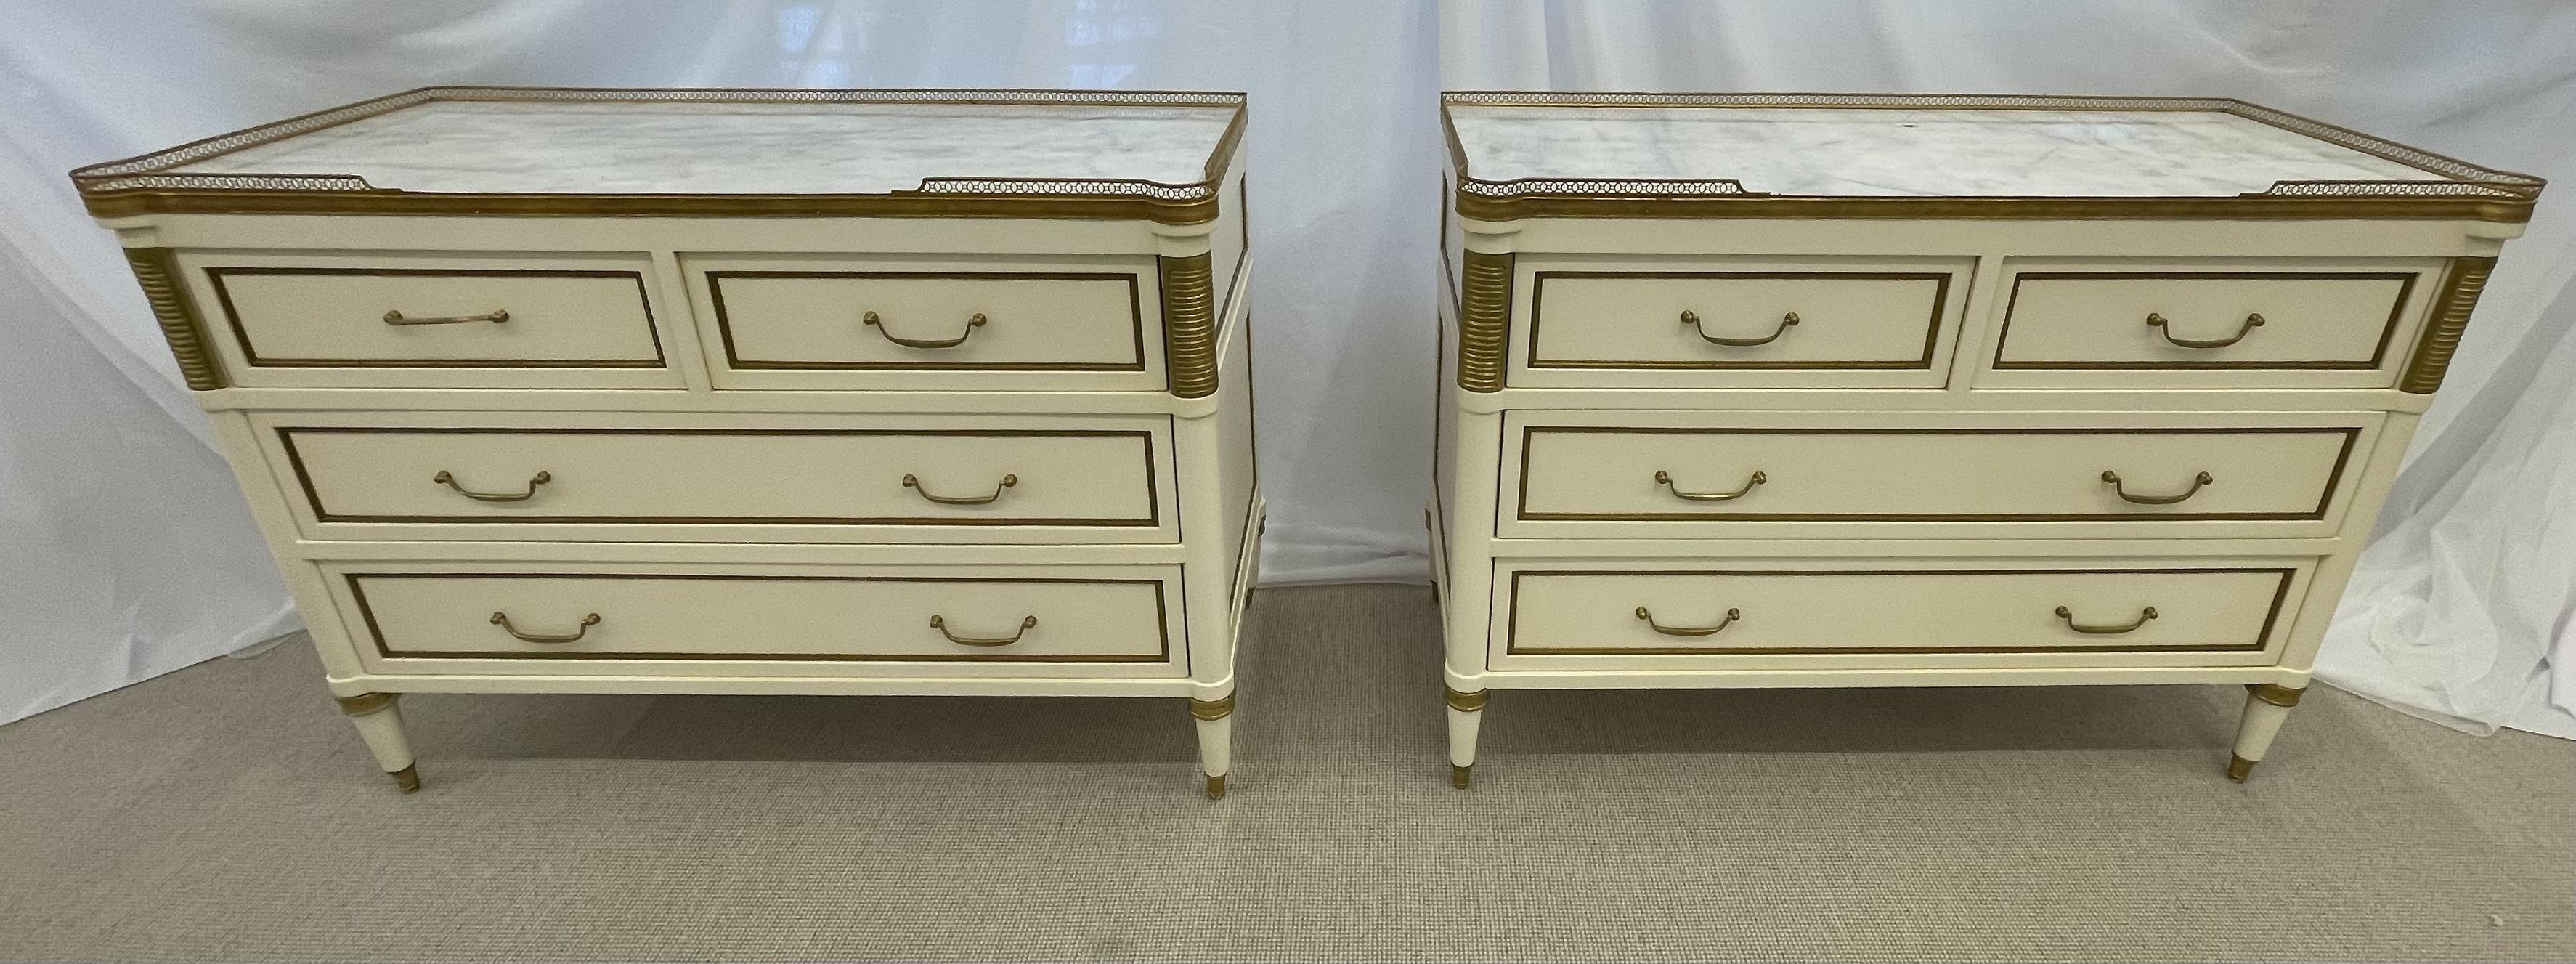 cream and gold chest of drawers